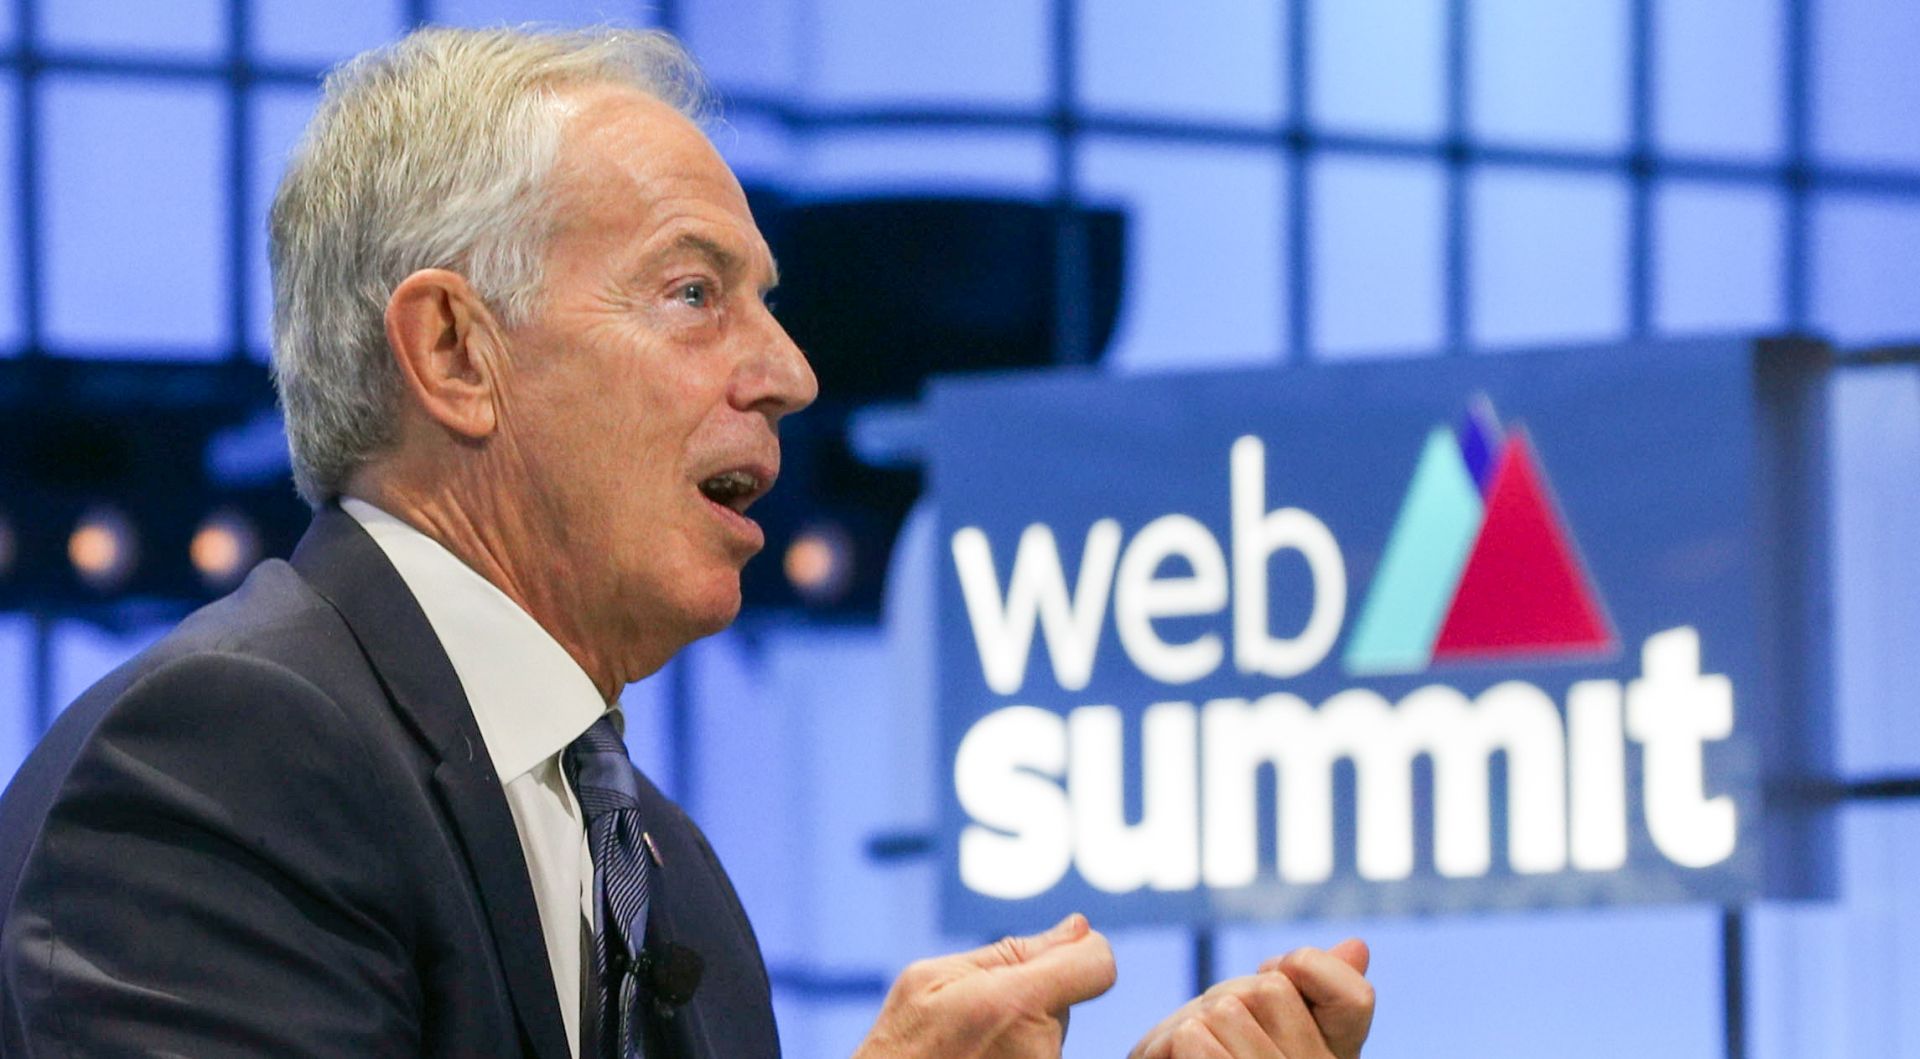 epa07975956 Former British Prime Minister Tony Blair  speaks during the third day of the Web Summit in Lisbon, Portugal, 06 November 2019. More the 70,000 participants from 163 countries participate in the 2019 Web Summit, considered the largest event of startups and technological entrepreneur ship in the world, takes place from 04 to 07 November.  EPA/ANTONIO COTRIM